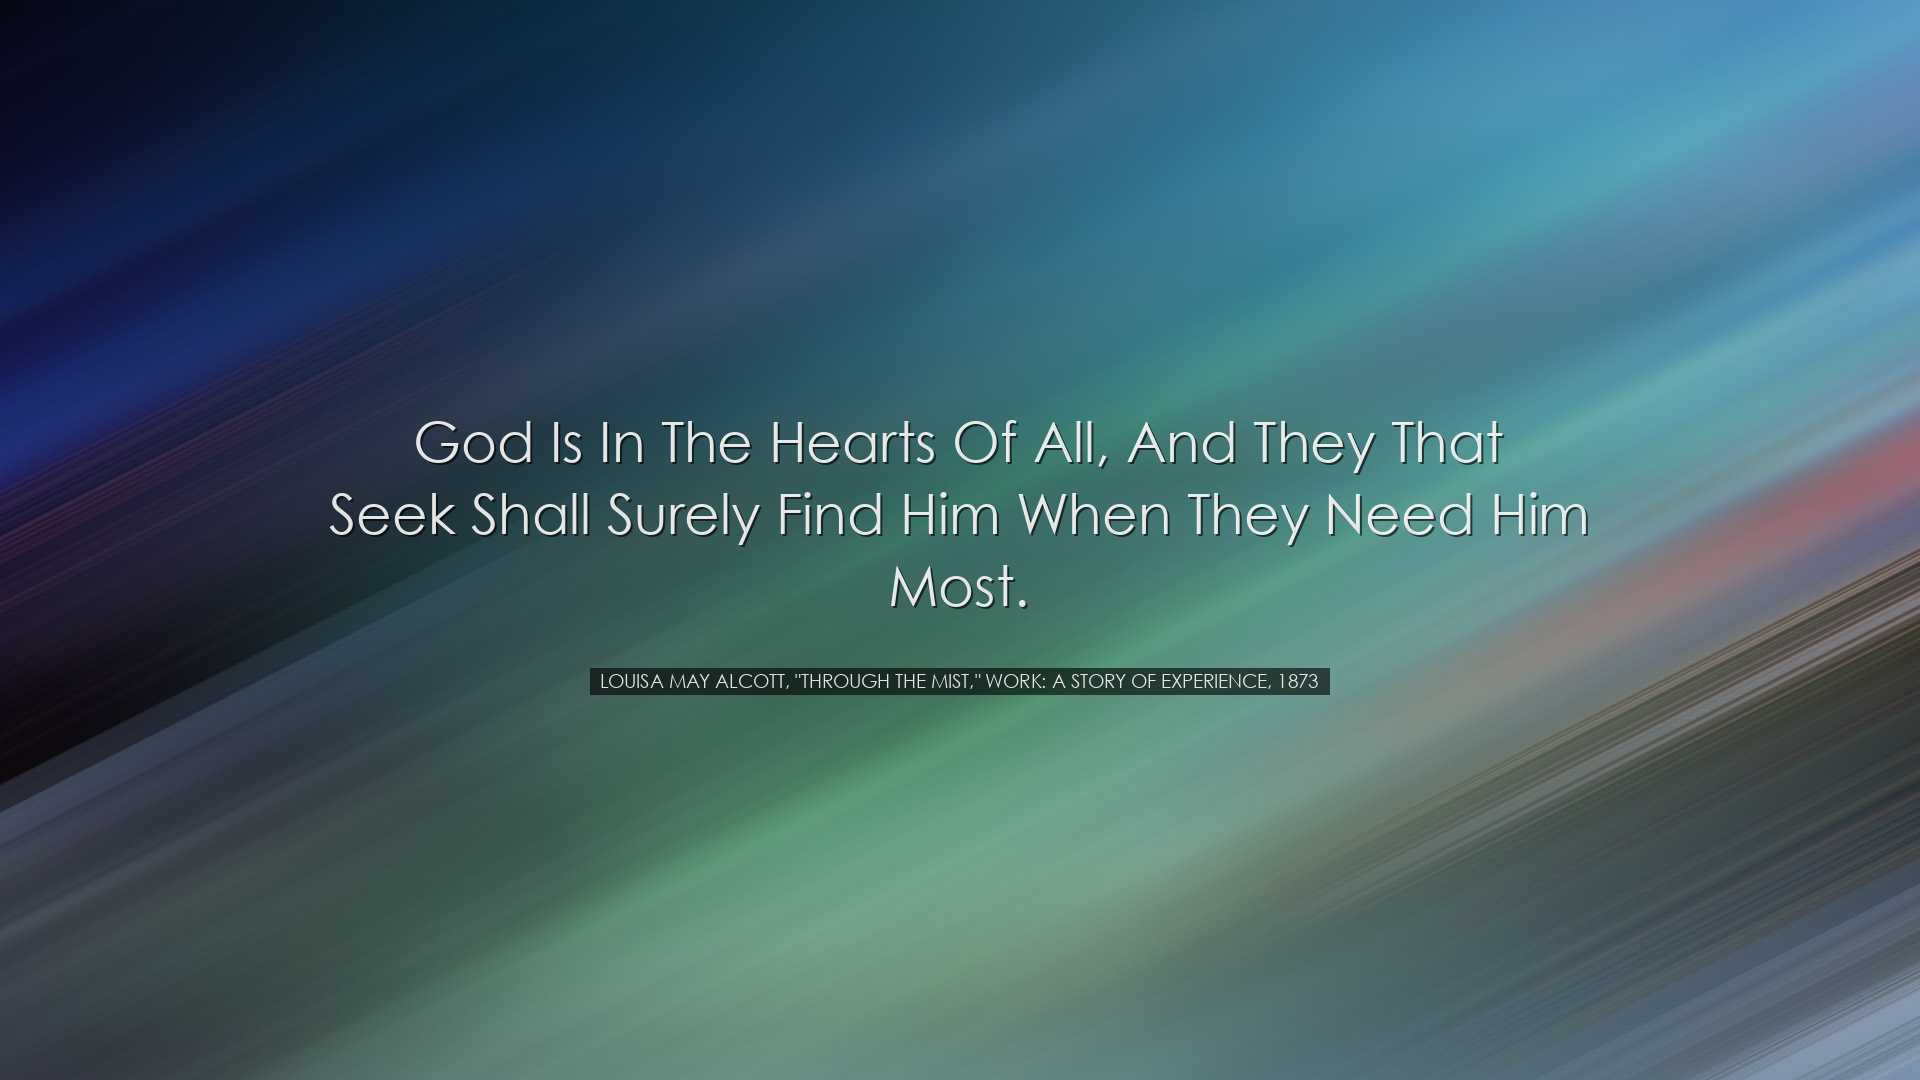 God is in the hearts of all, and they that seek shall surely find